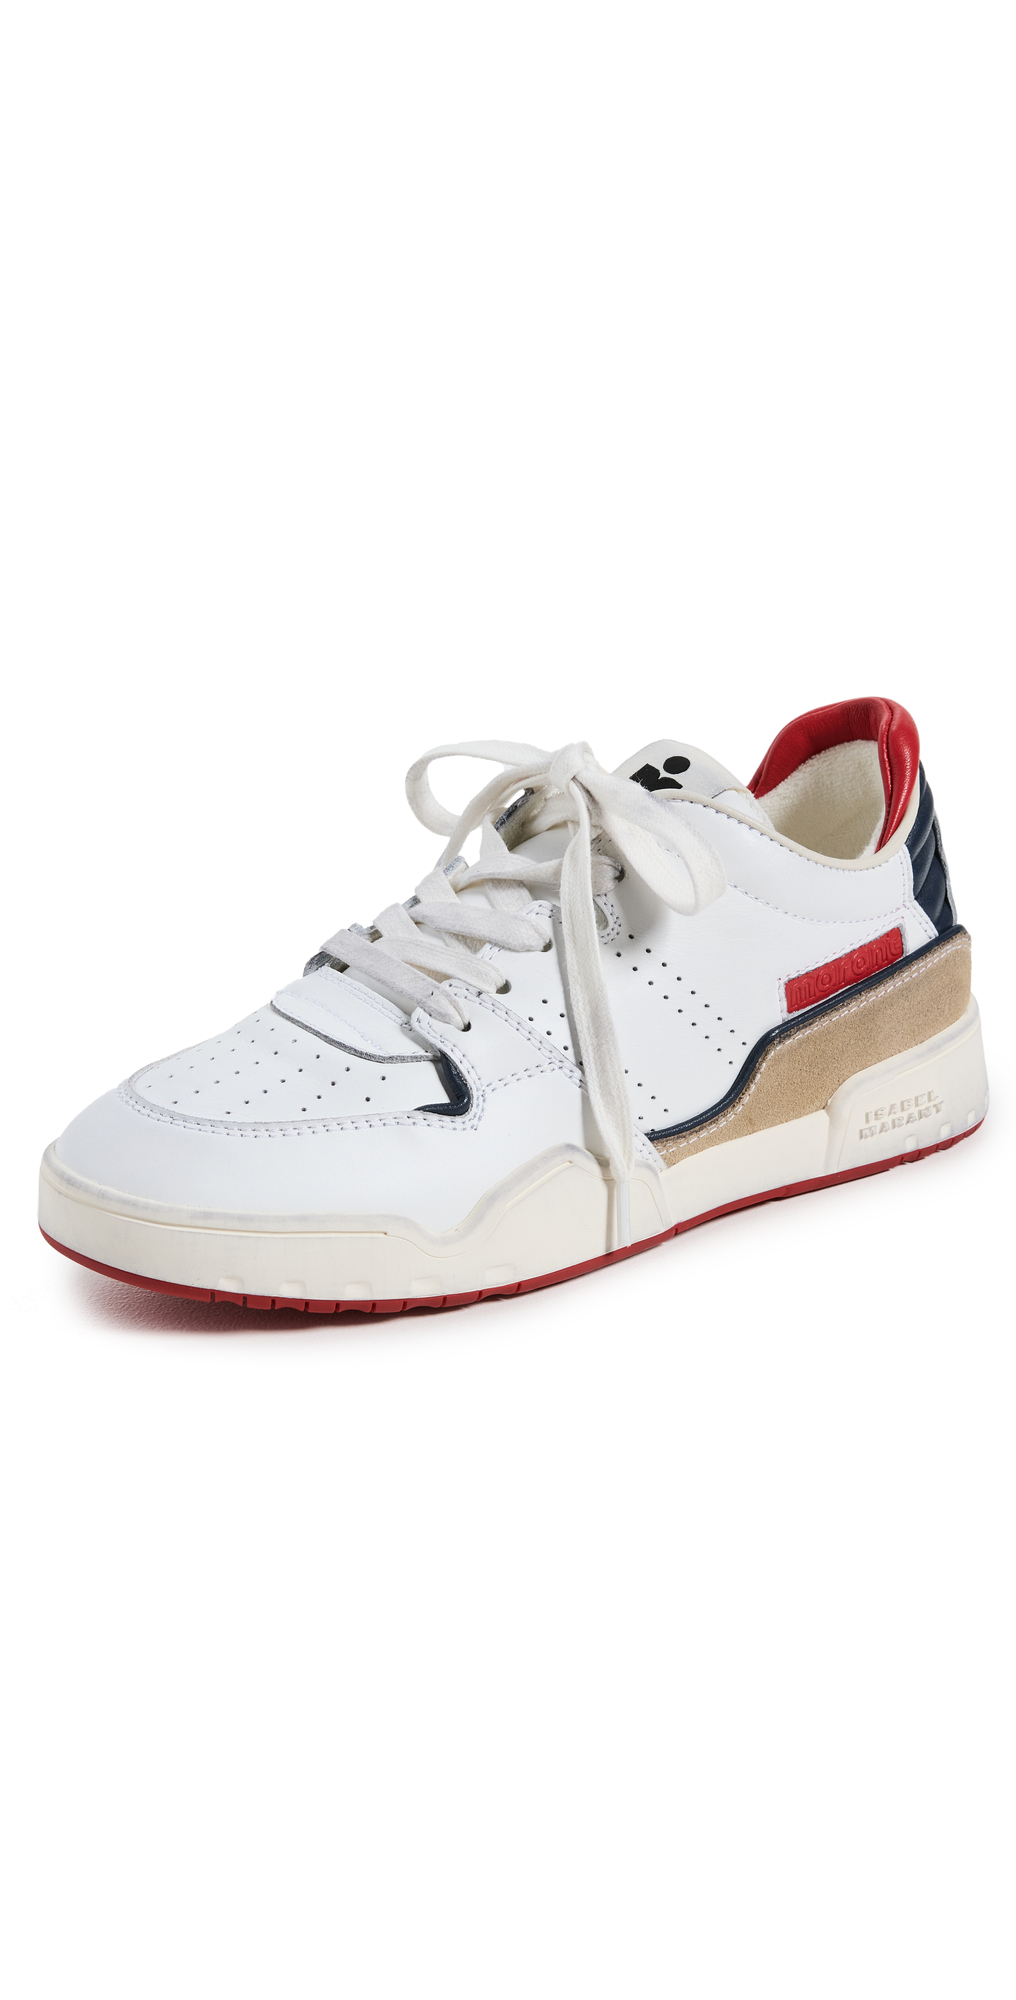 Buy Isabel Marant Emree-Gz Sneakers Shoes Online | Shoes Trove